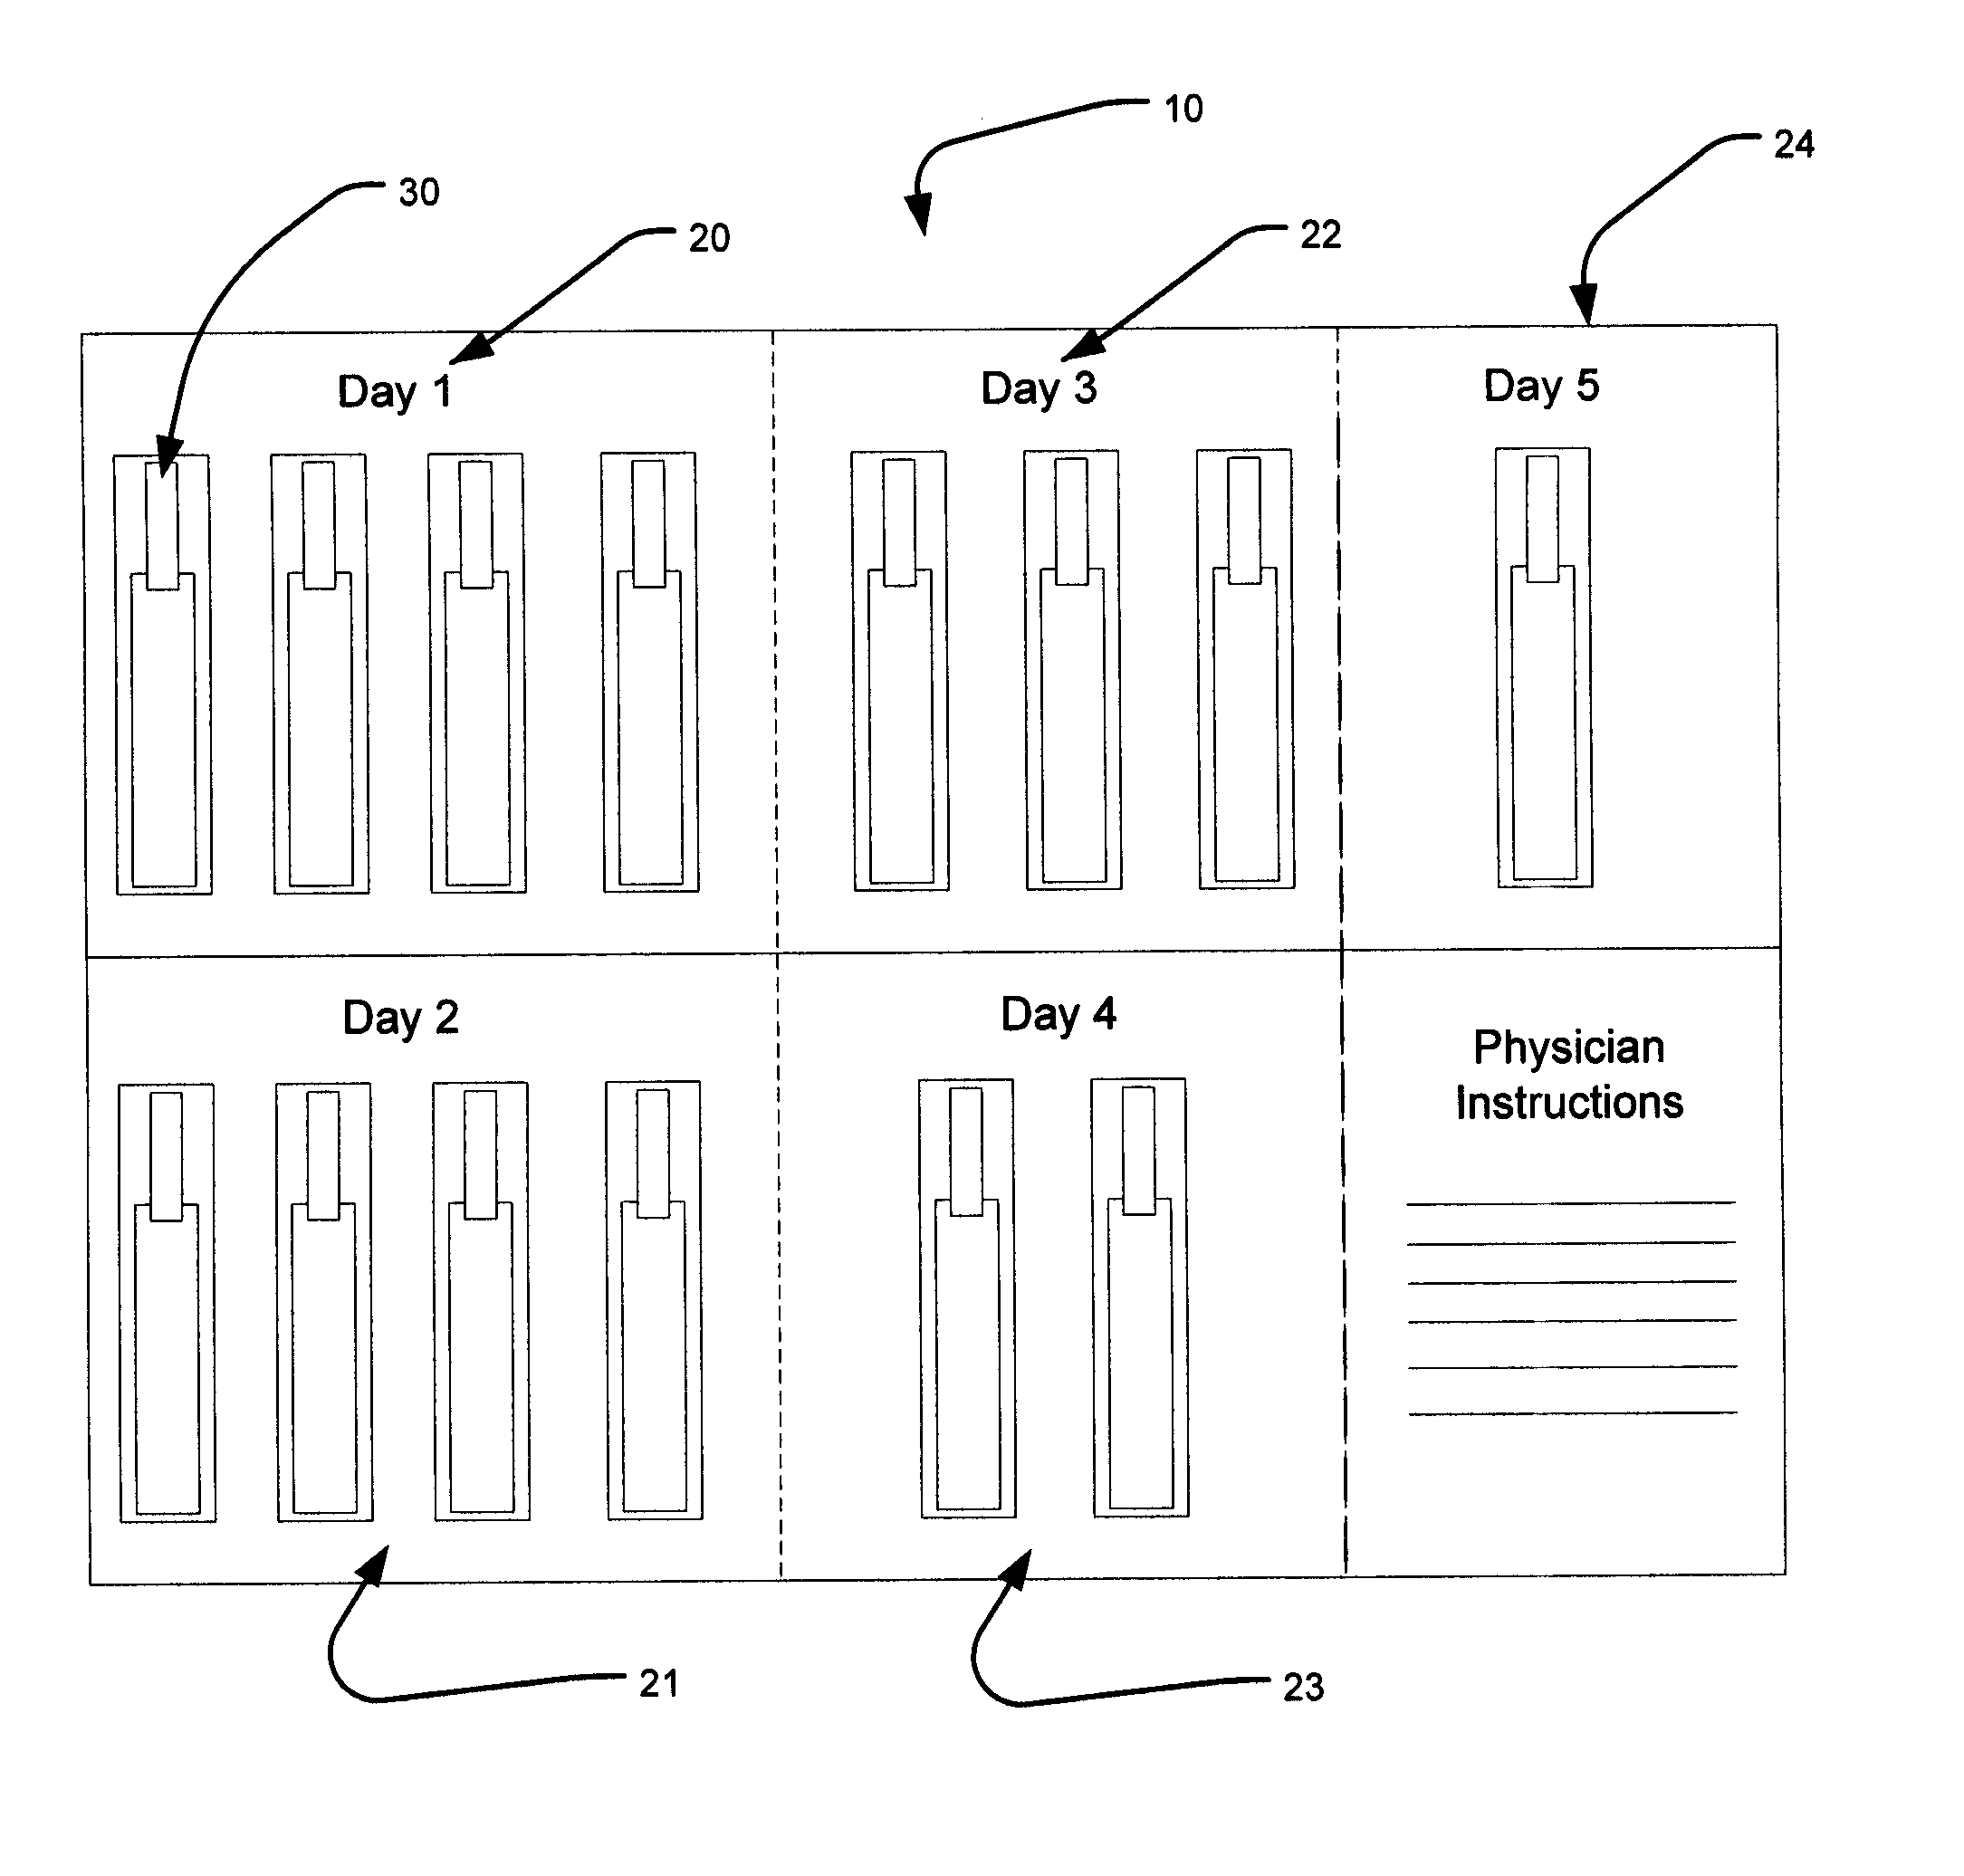 Dose packaging system for load-dose titration administration of a liquid formulation